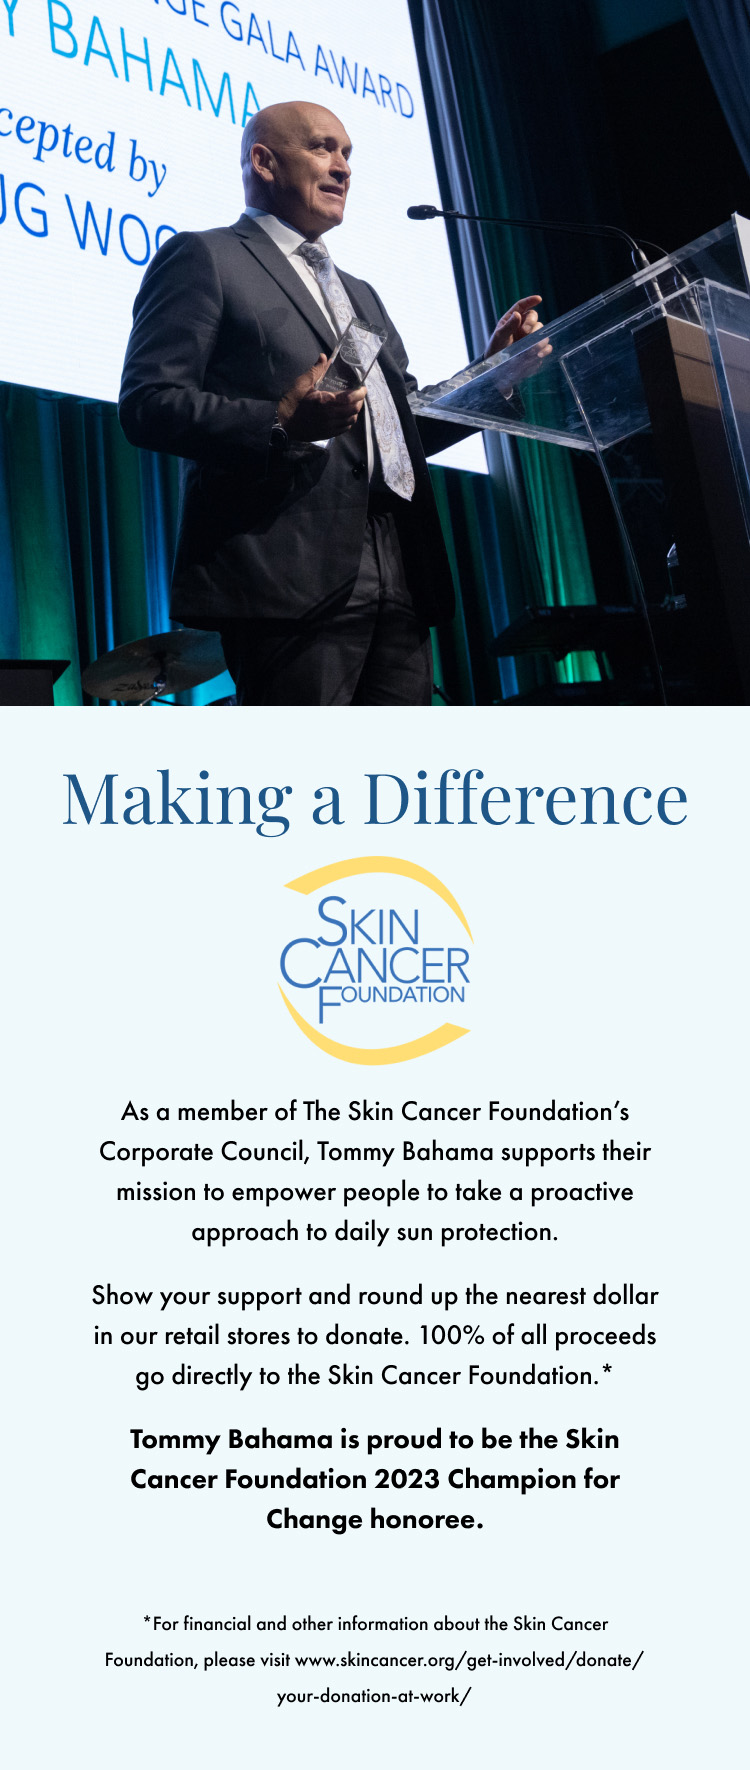 Making a Difference: Tommy Bahama is a member of The Skin Cancer Foundation's Corporate Council